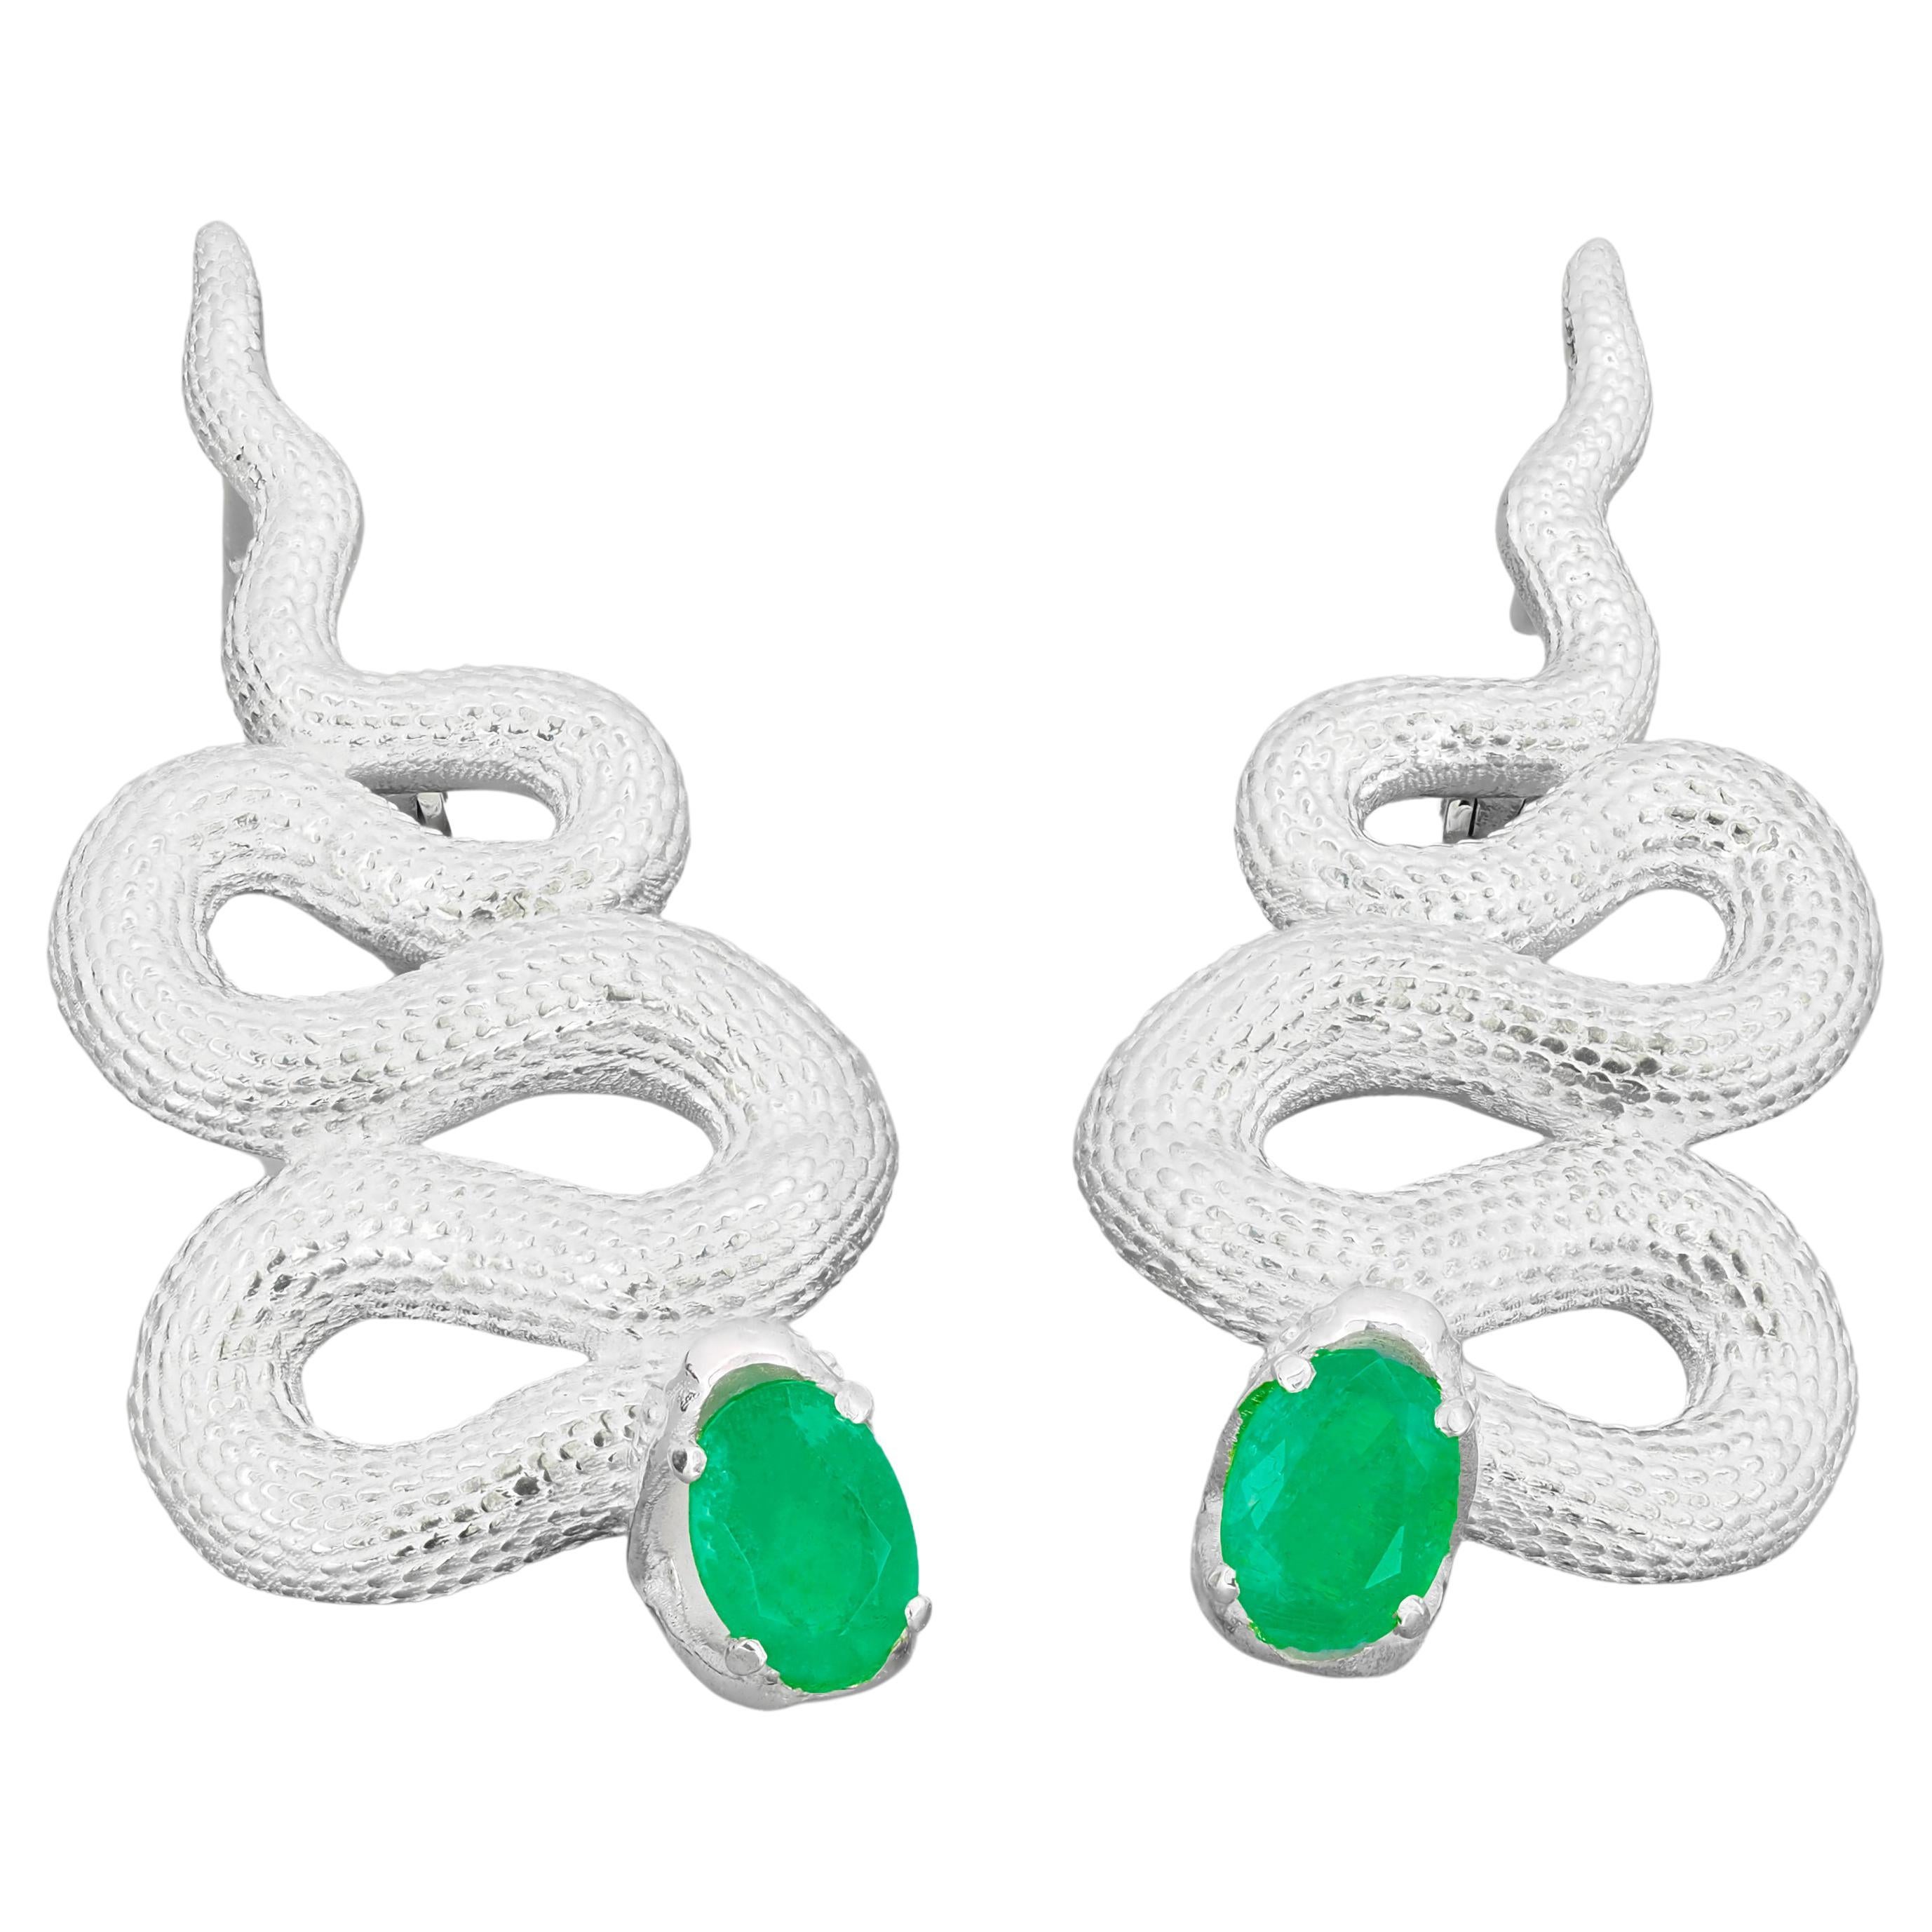 Emerald earrings. Massive Snake Earrings with Emeralds and Diamonds For Sale